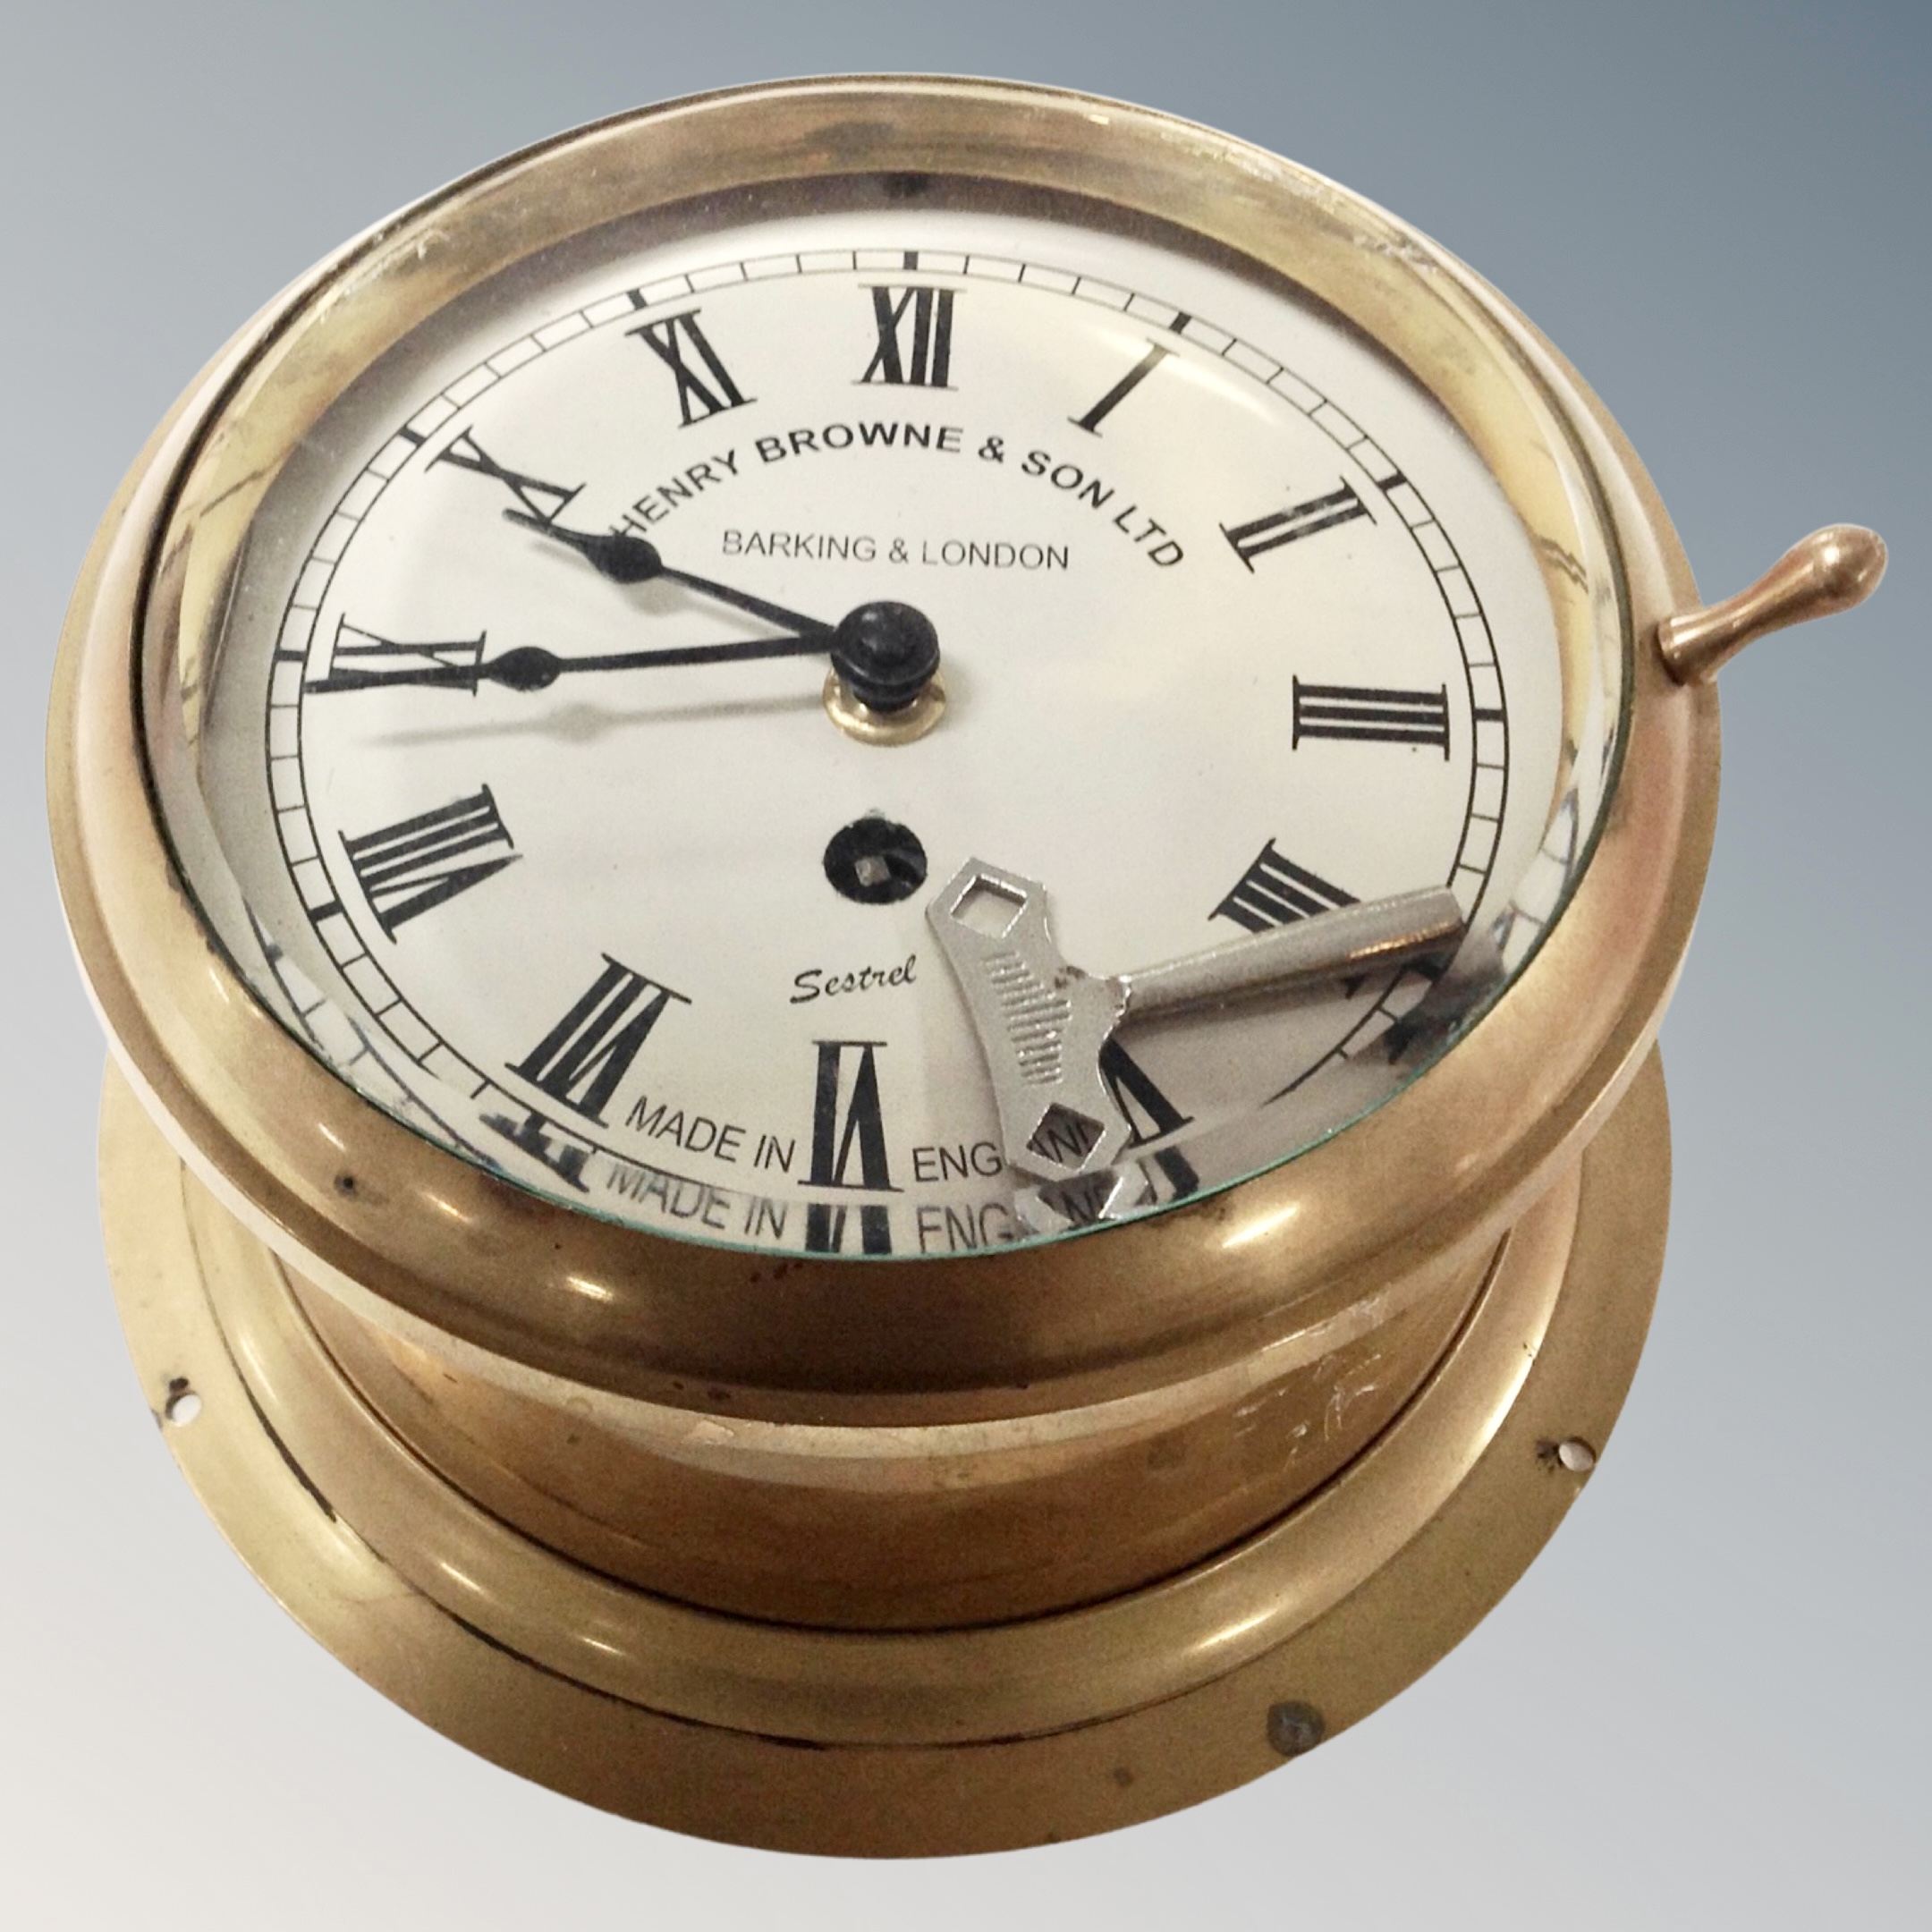 A brass ships clock with key by Henry Browne and Son.